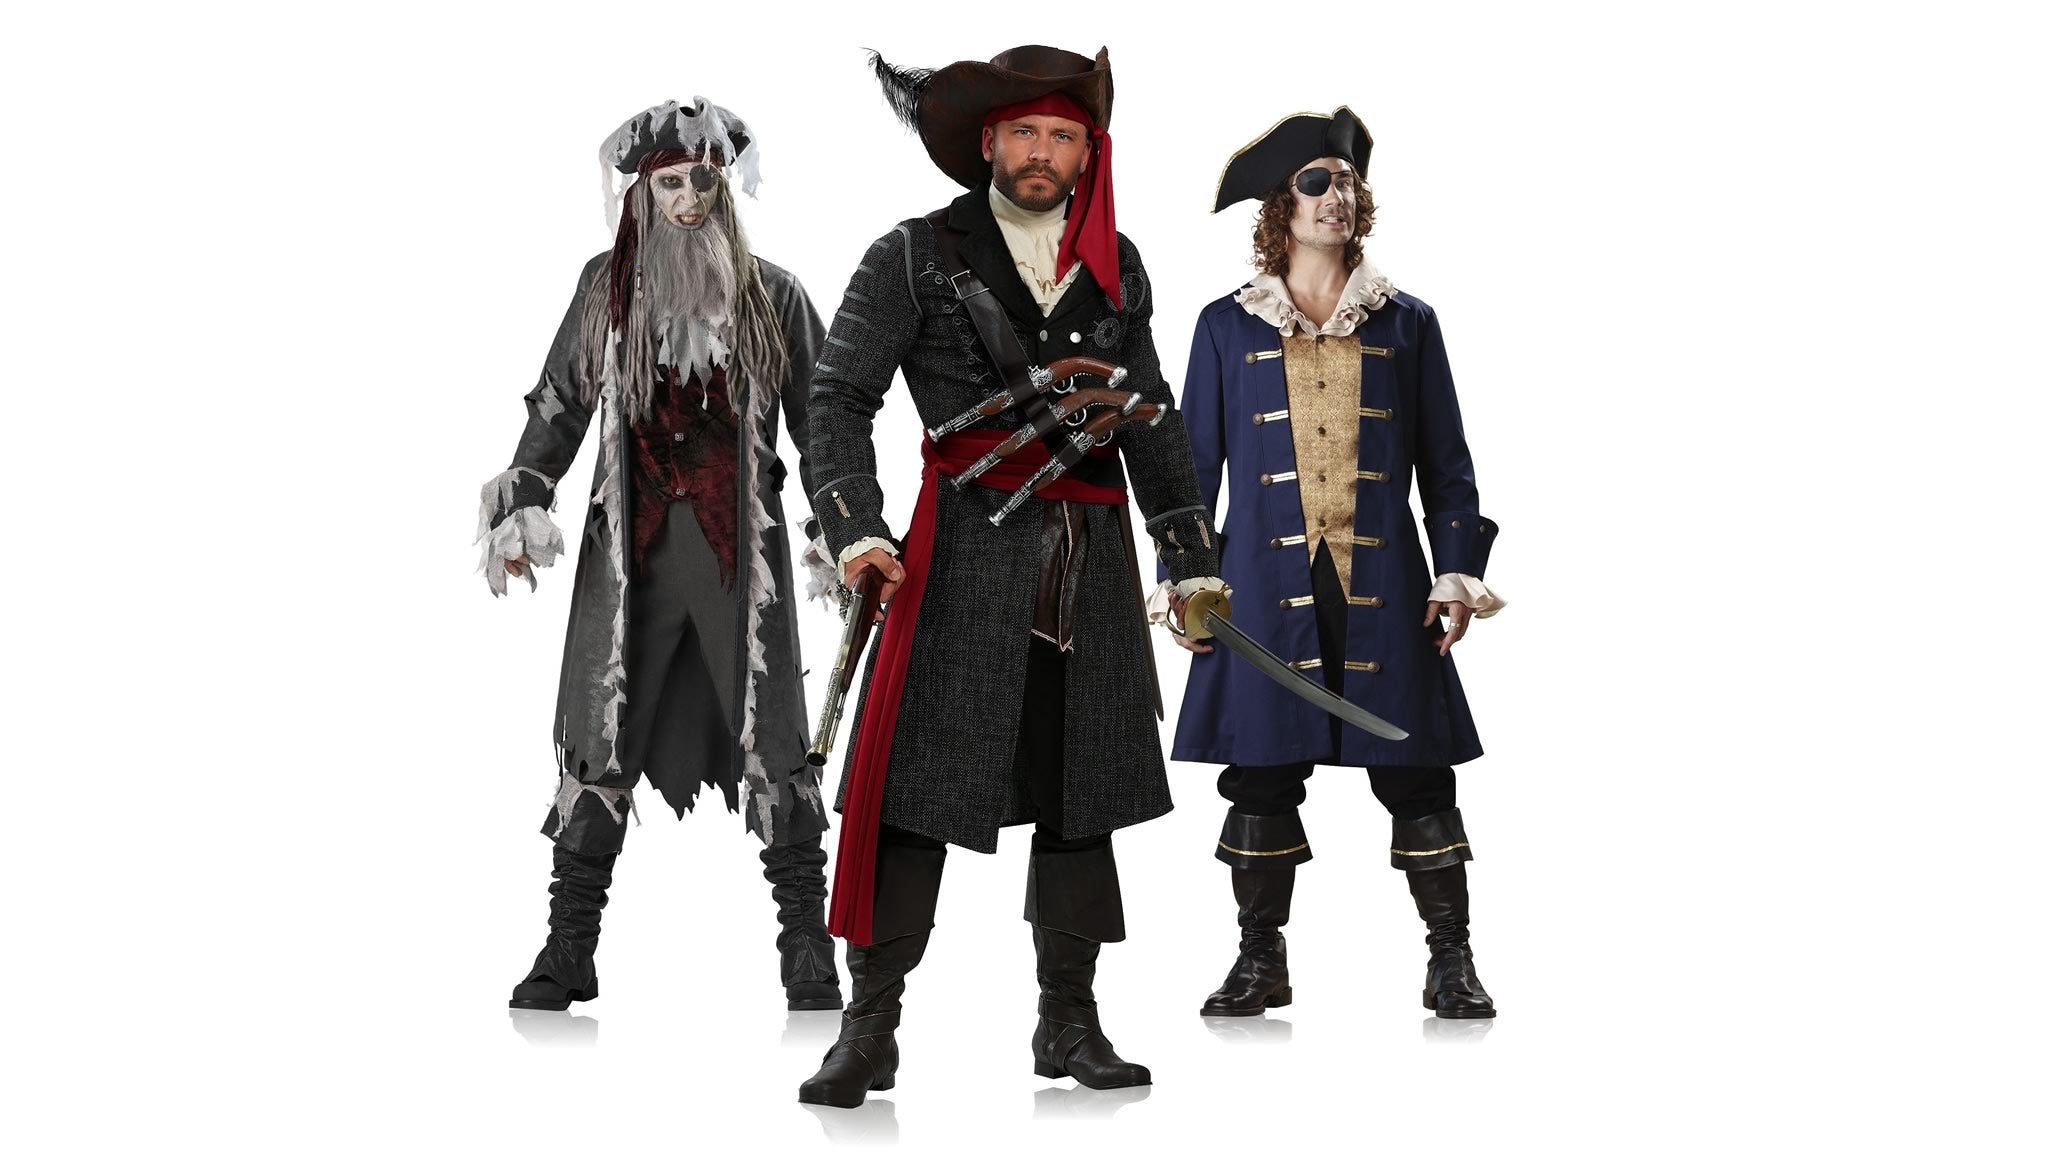 Pirate Costumes For Men